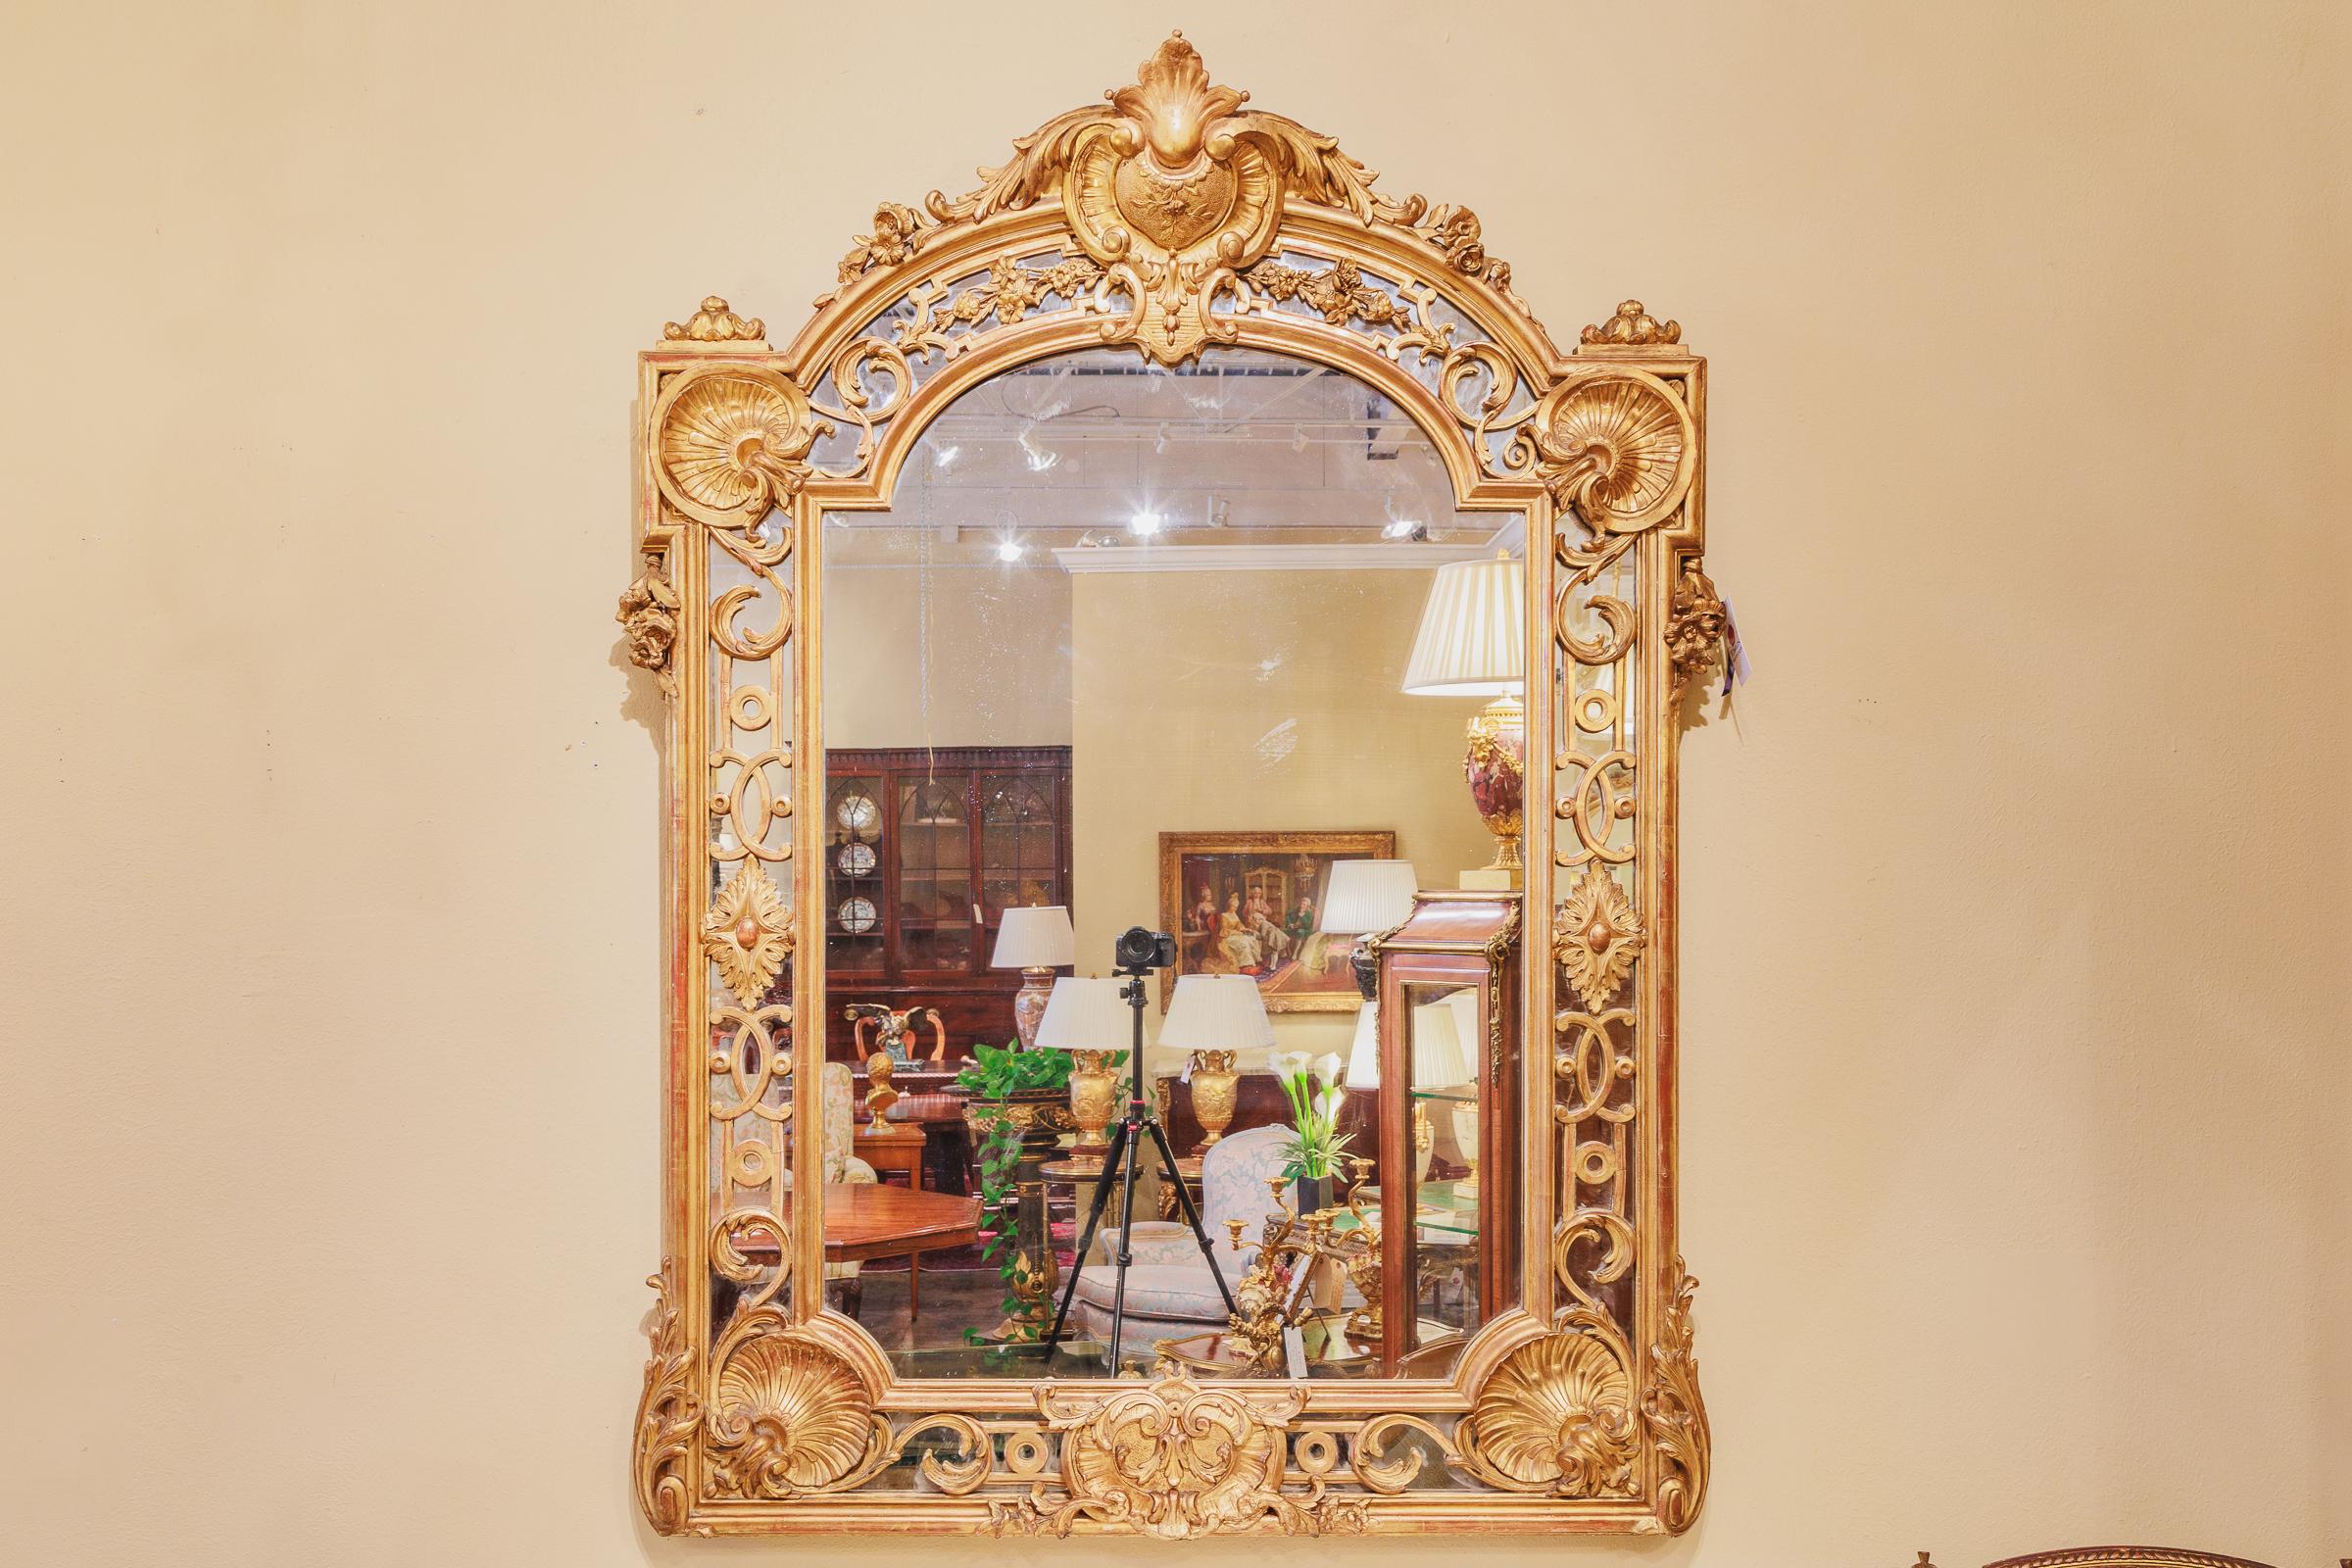 A very fine 19th century French Regence gilded and hand carved large mirror. Finely detailed. Original gilding.